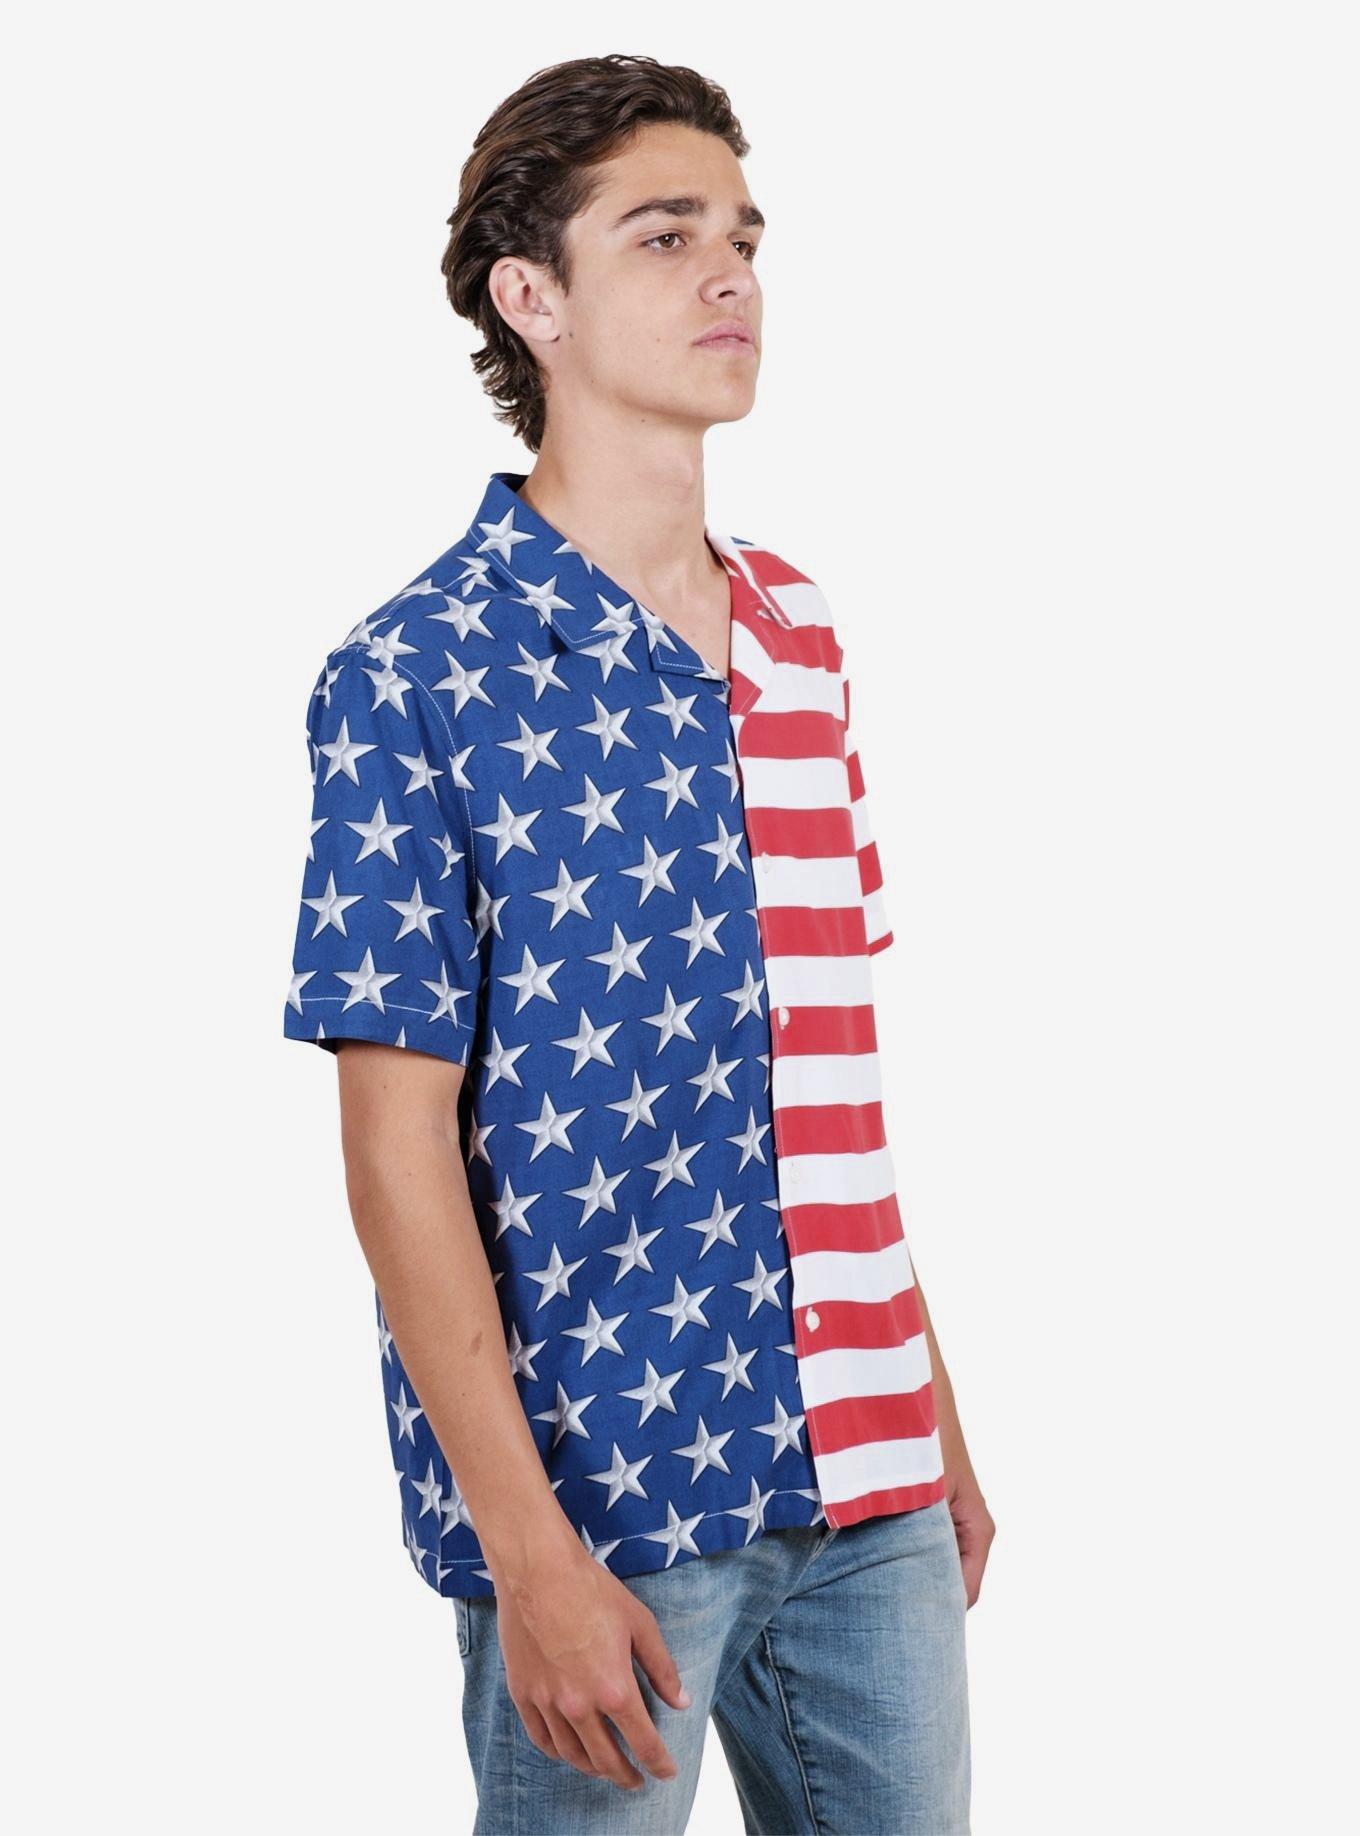 Split Flag Woven Shirt in Red, White, and Blue Button Up, RED  WHITE  BLUE, alternate